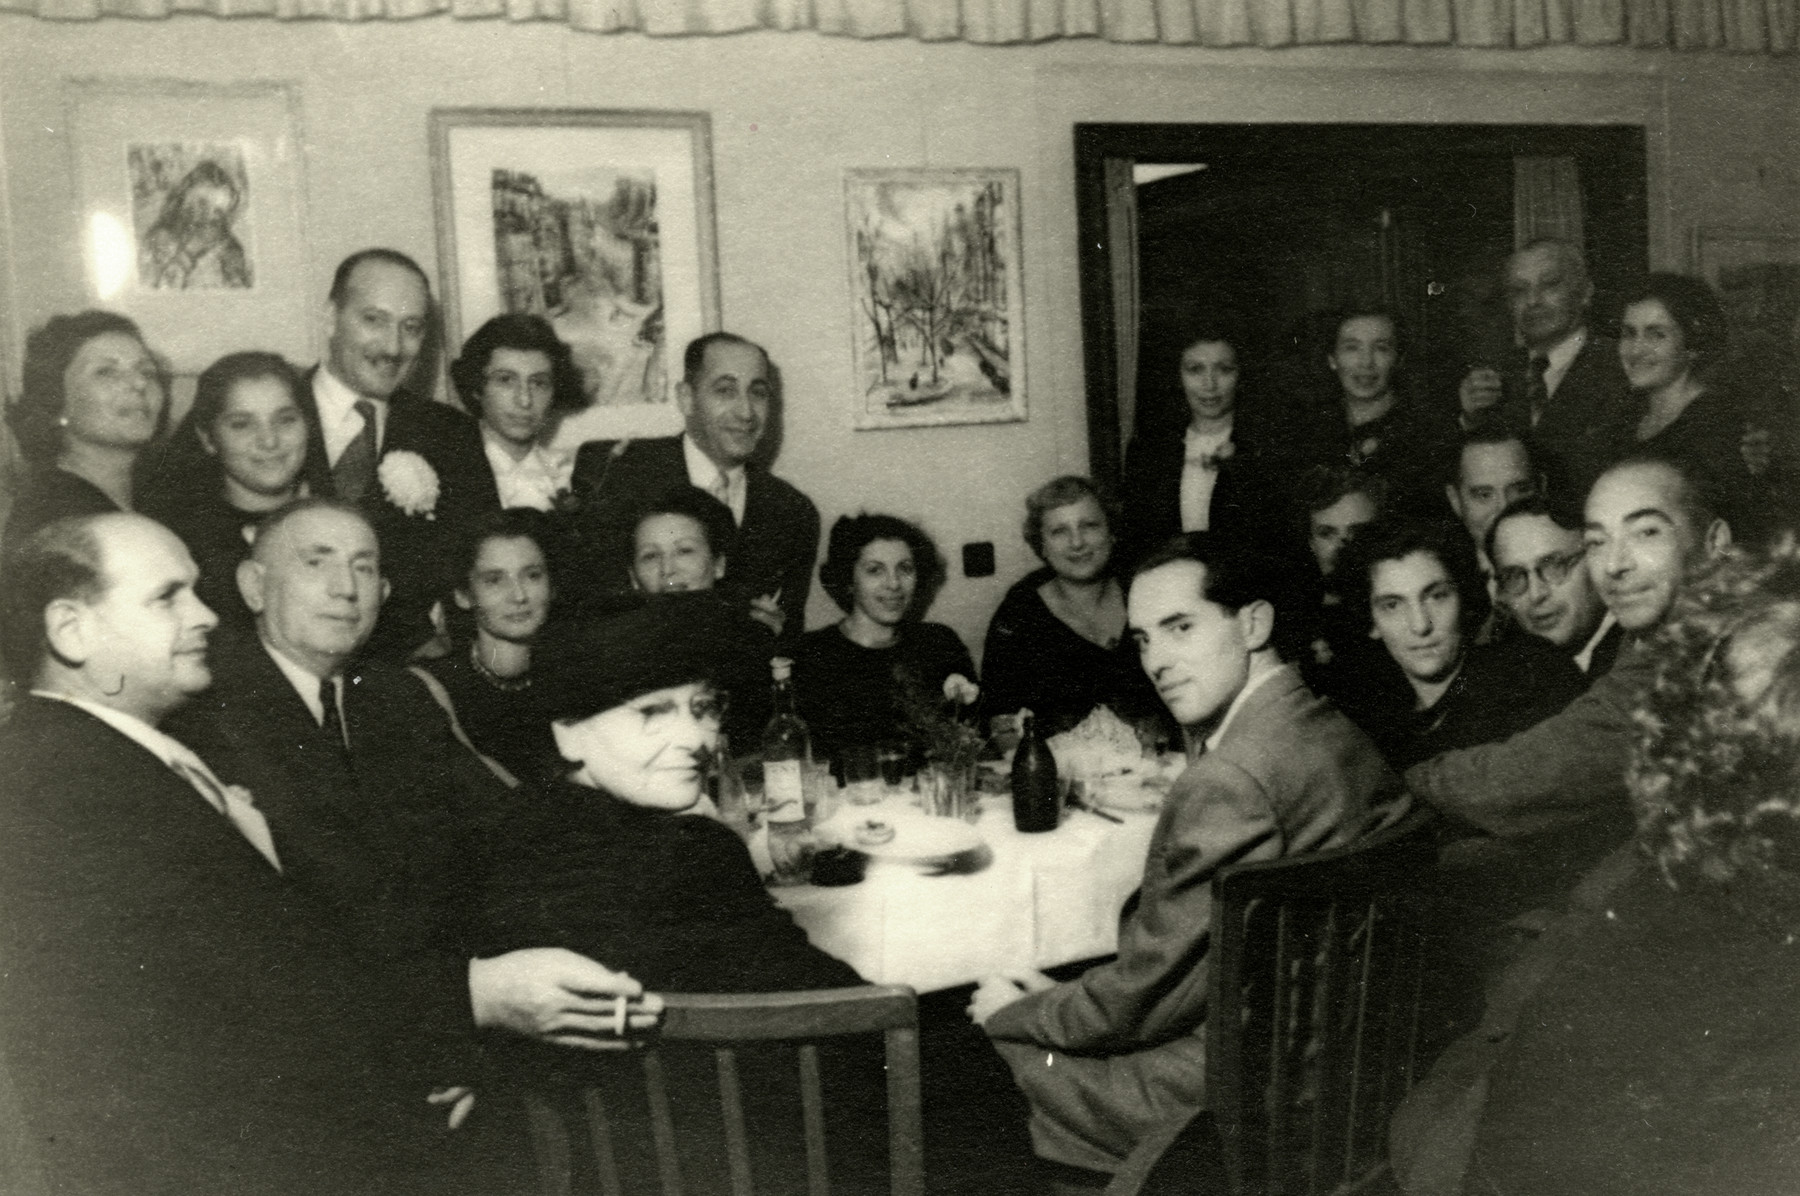 Former patisans gather for a party  in Tel Aviv after the war.

David Svirsky is seated in front at the table wearing a suit.